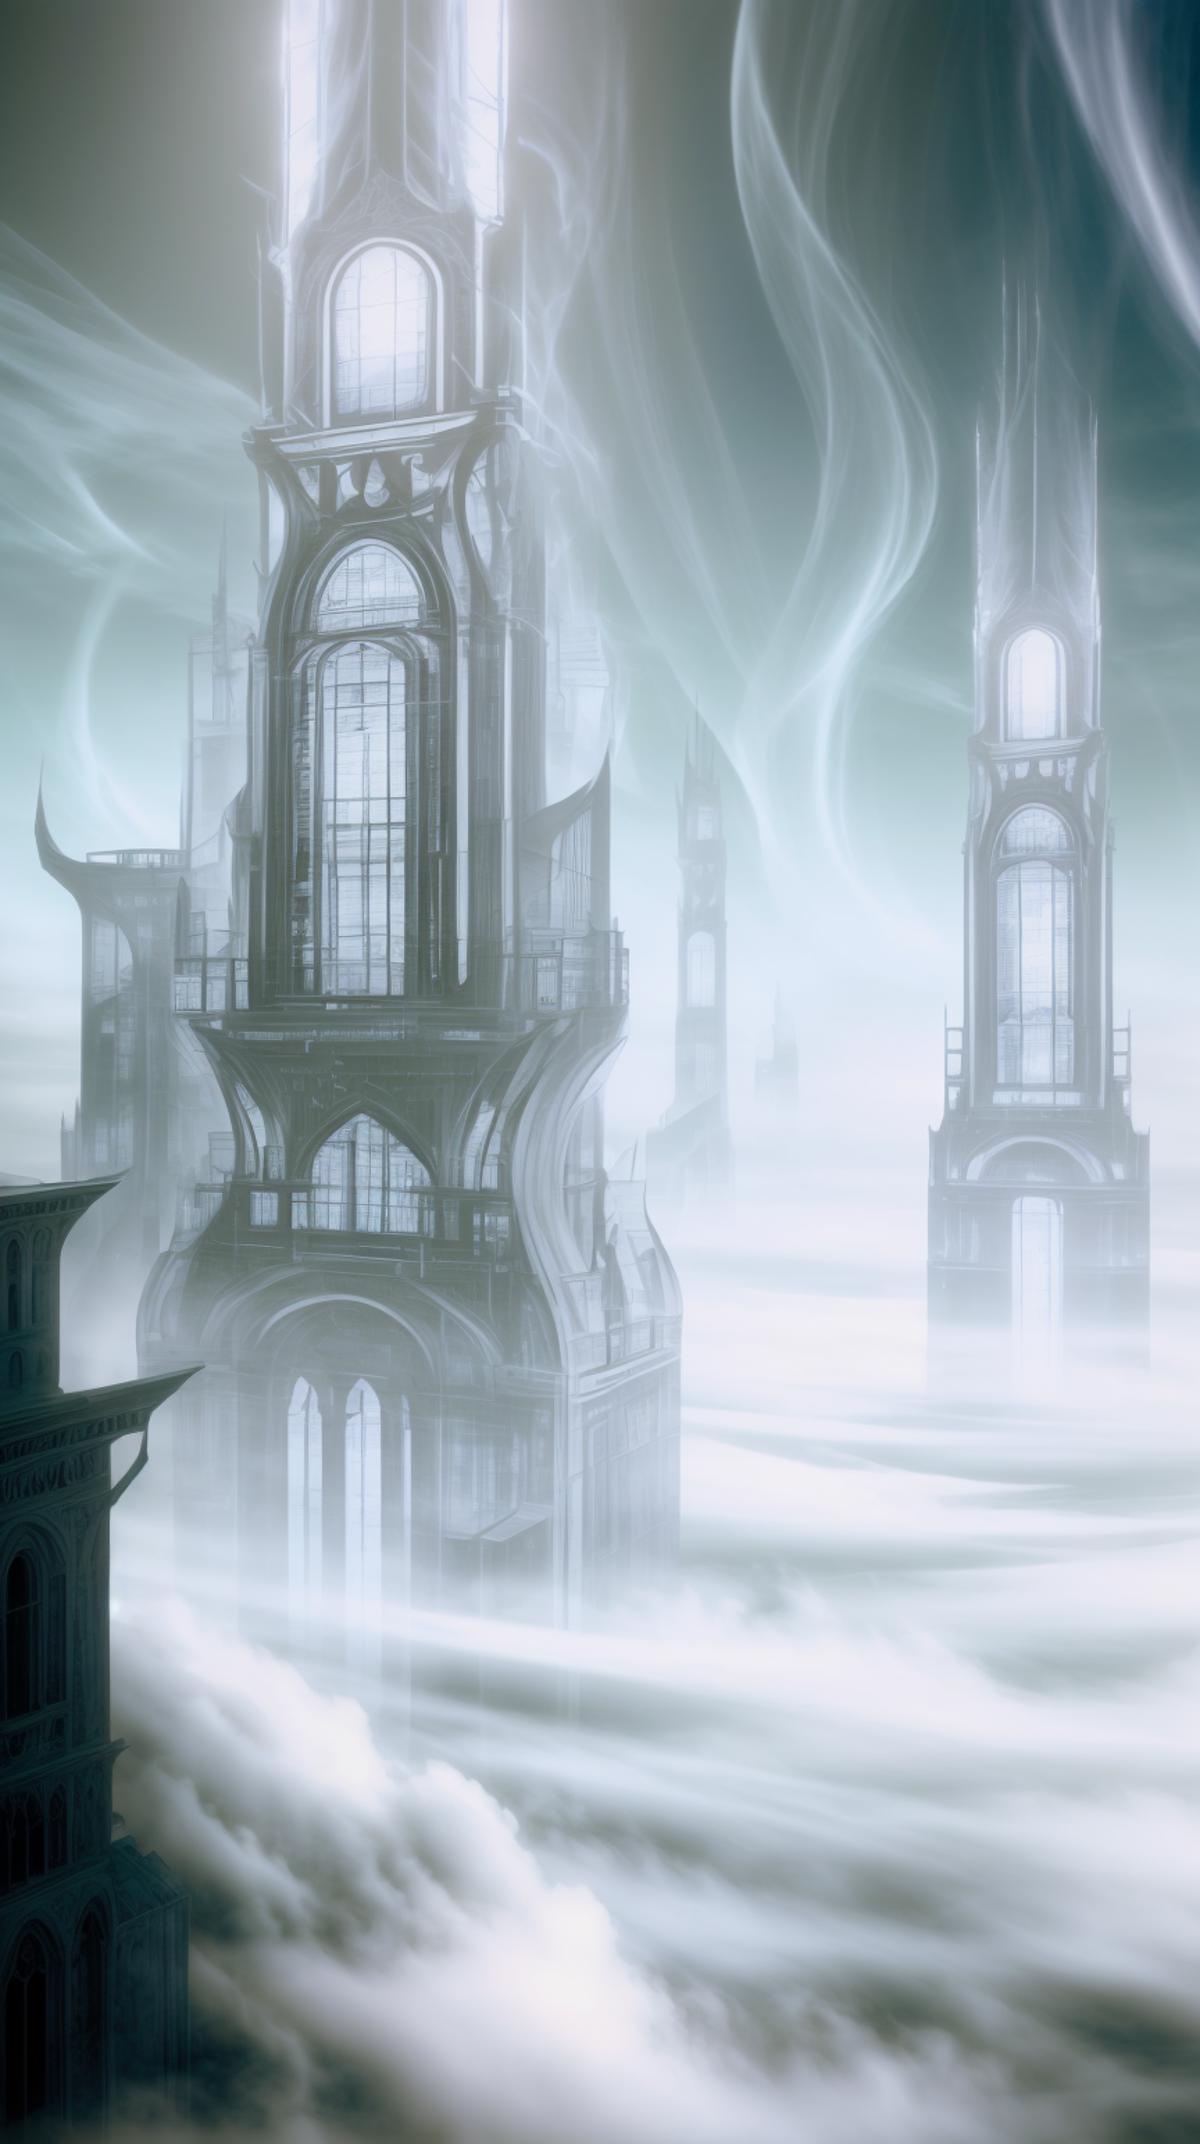 World of Mist image by mnemic